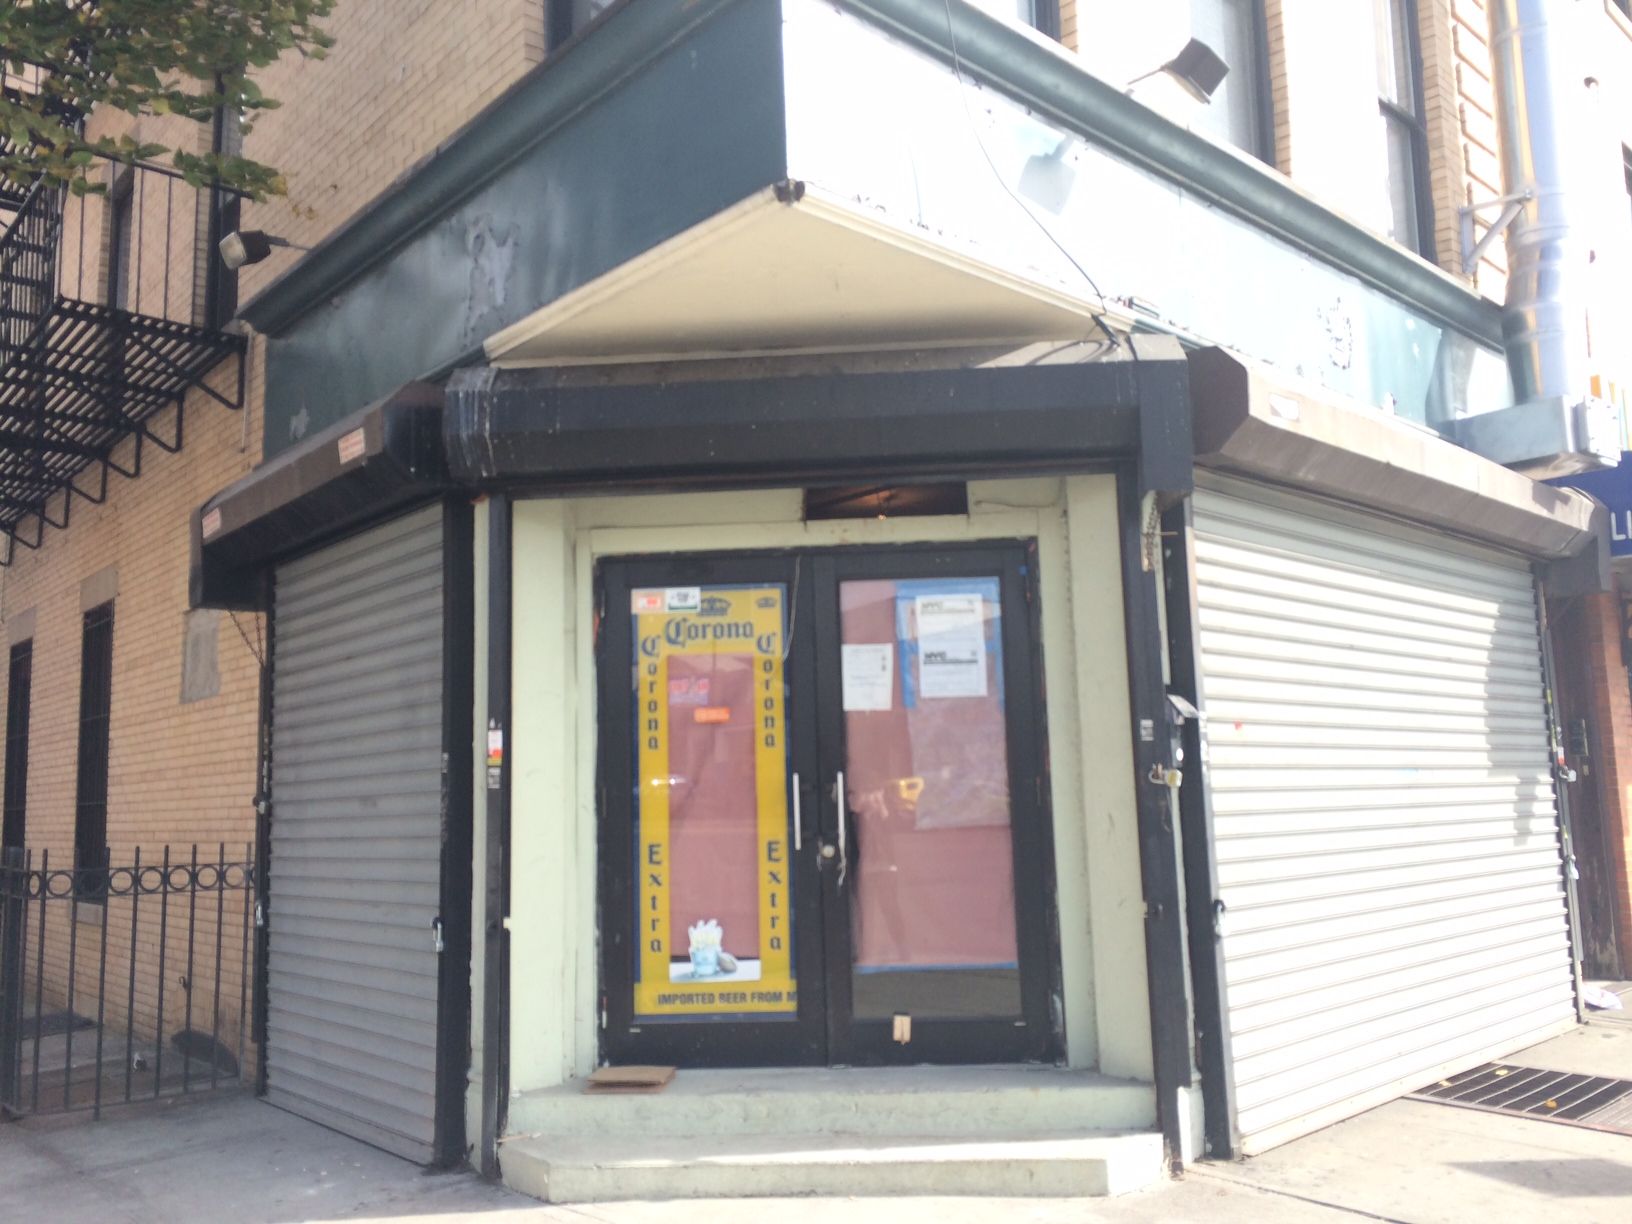 Renovation Work Started At The Former La Guadalupana Taqueria Mexicana On Coney Island Avenue & Turner Place